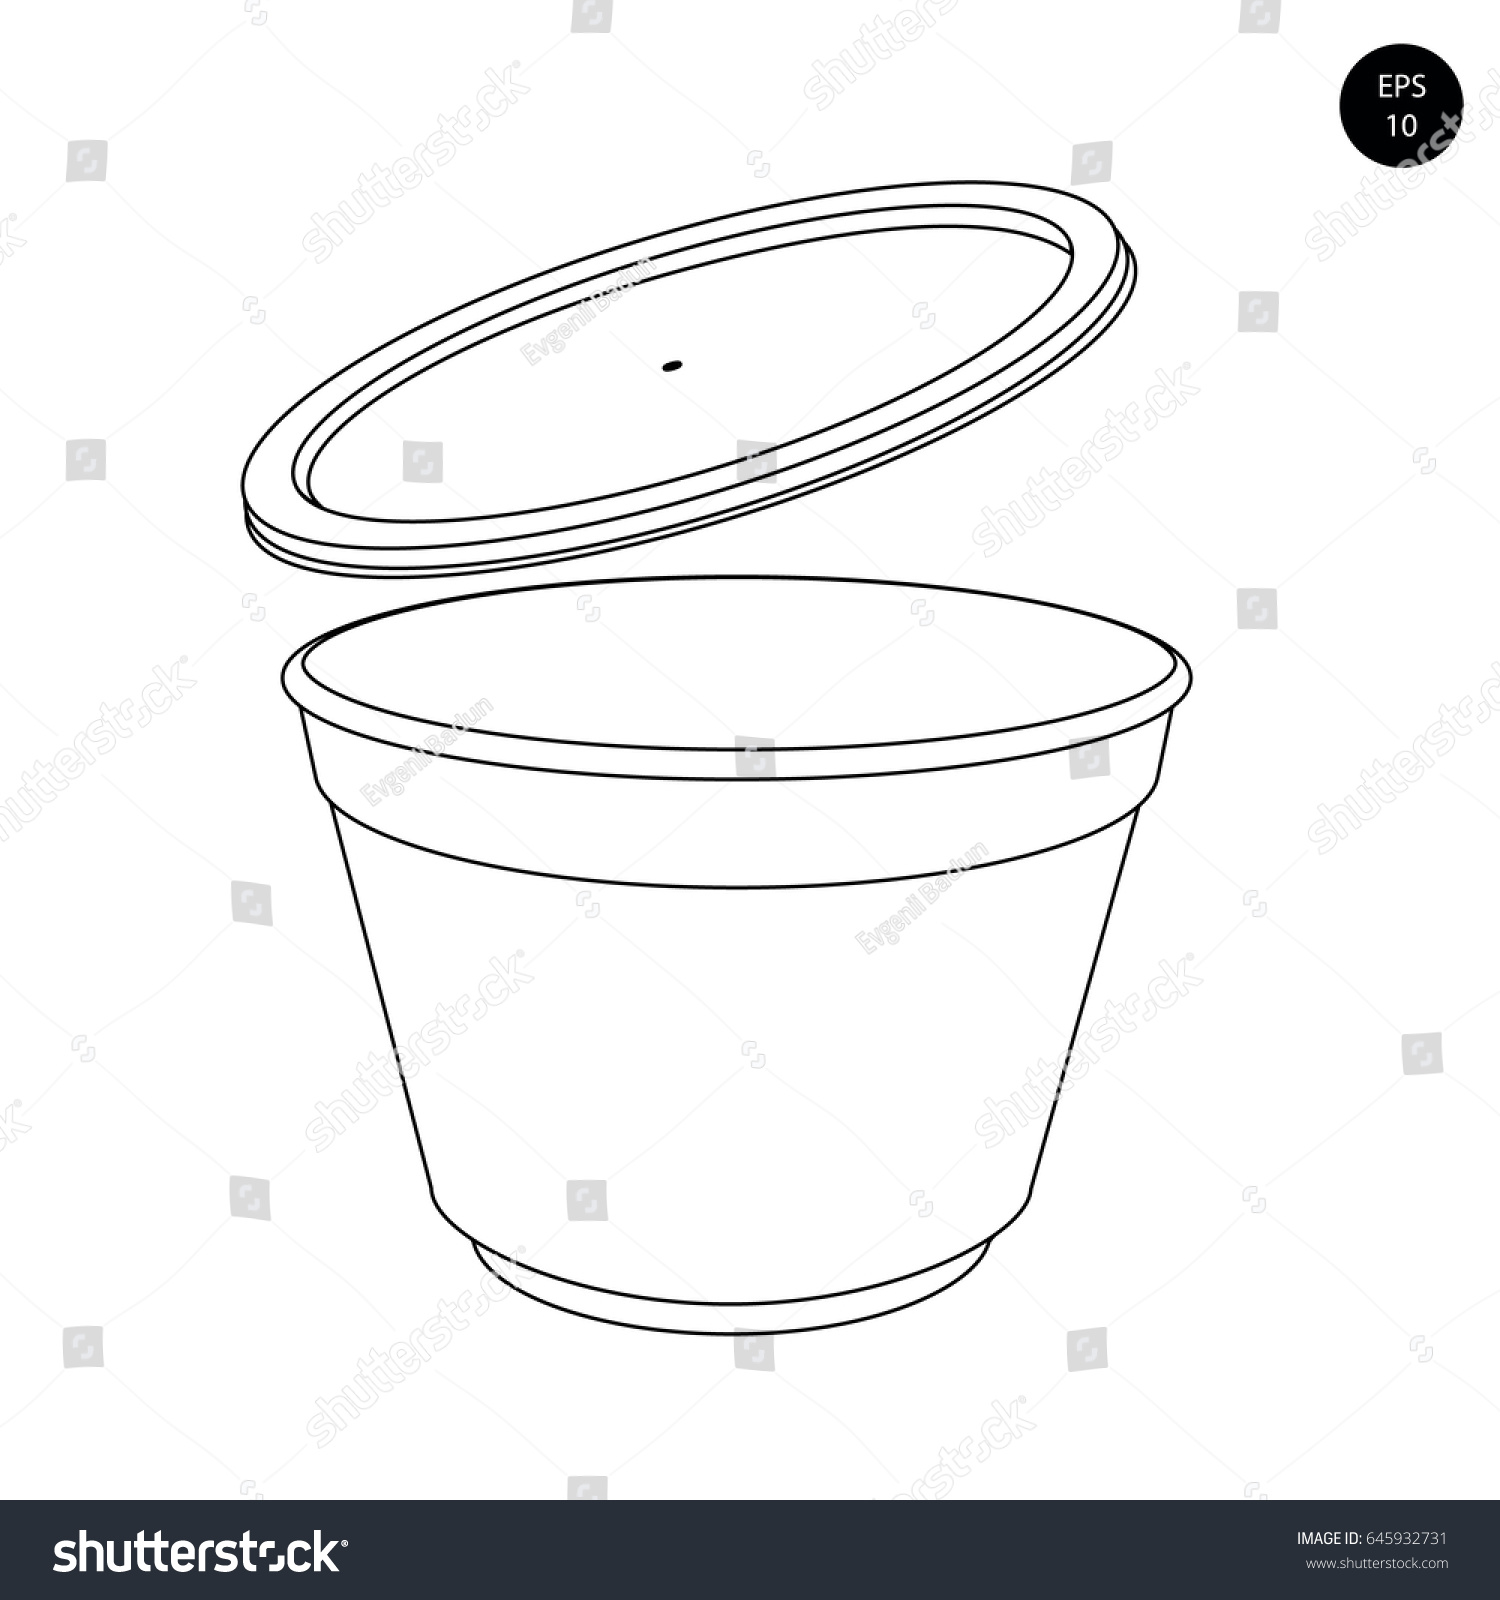 Download Vector Illustration Plastic Container Lid Hot Stock Vector Royalty Free 645932731 PSD Mockup Templates